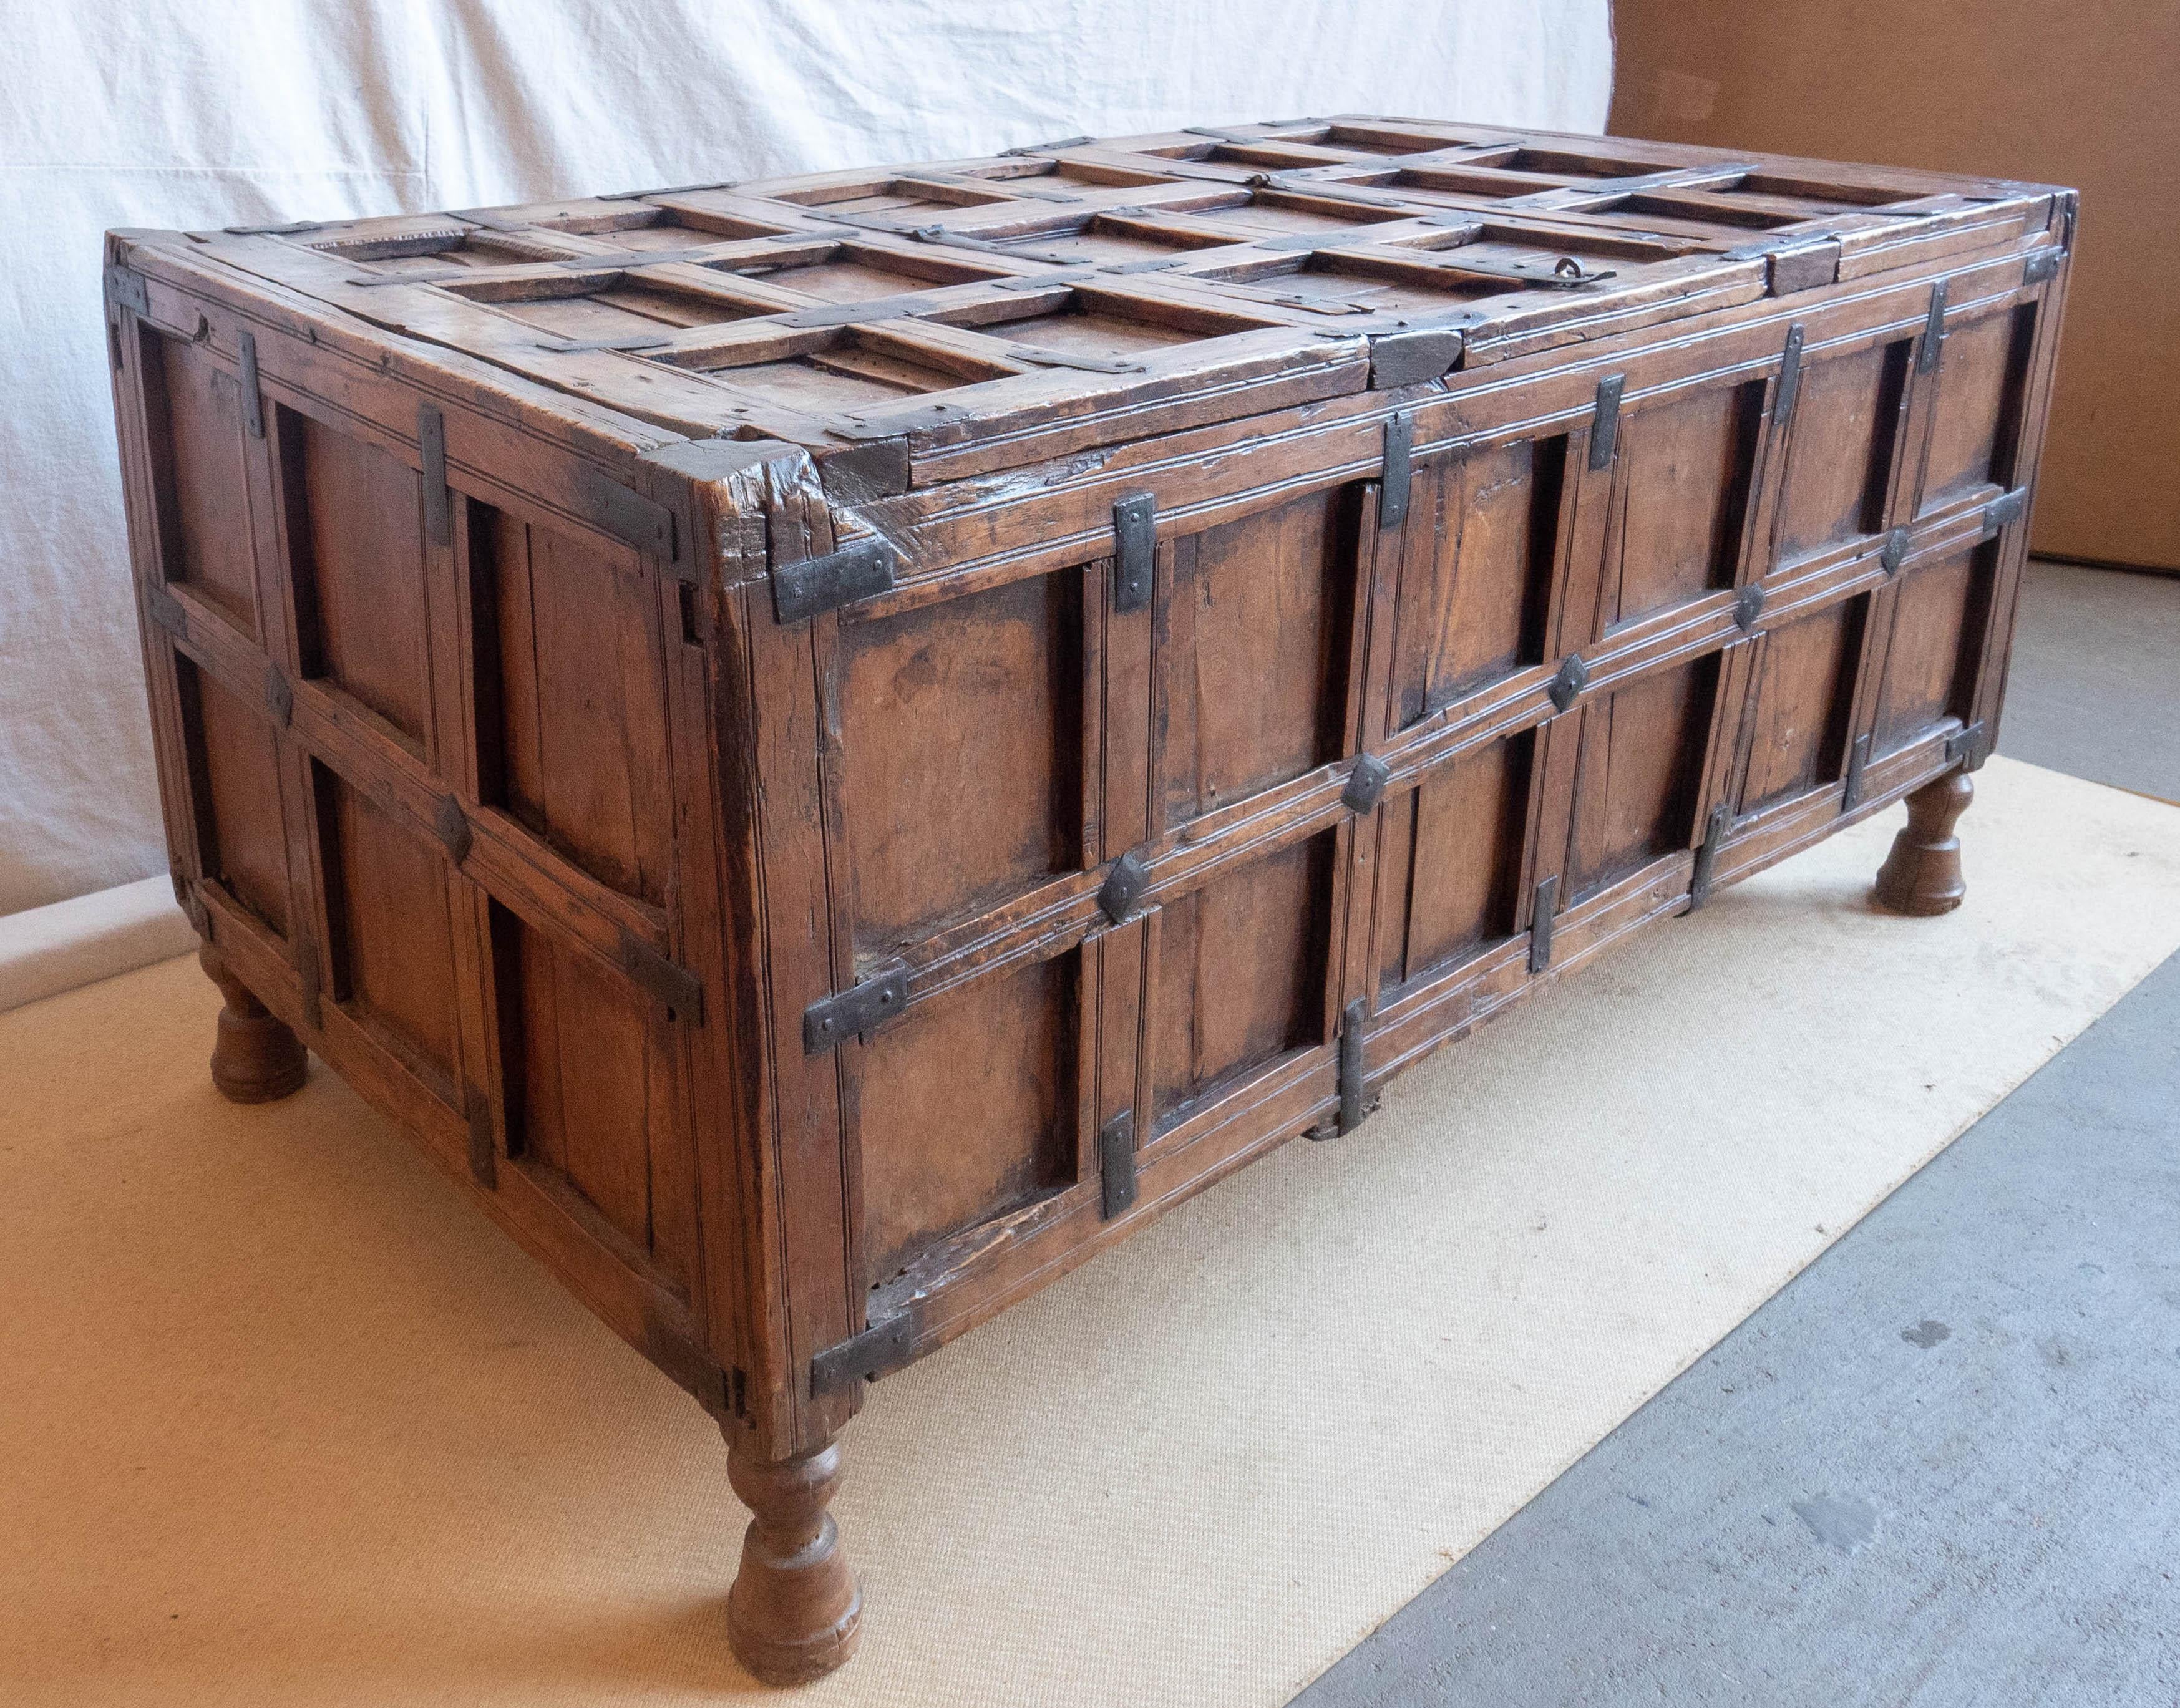 European Early 19th Century Paneled Fruitwood Coffer/Trunk with Iron Accents For Sale